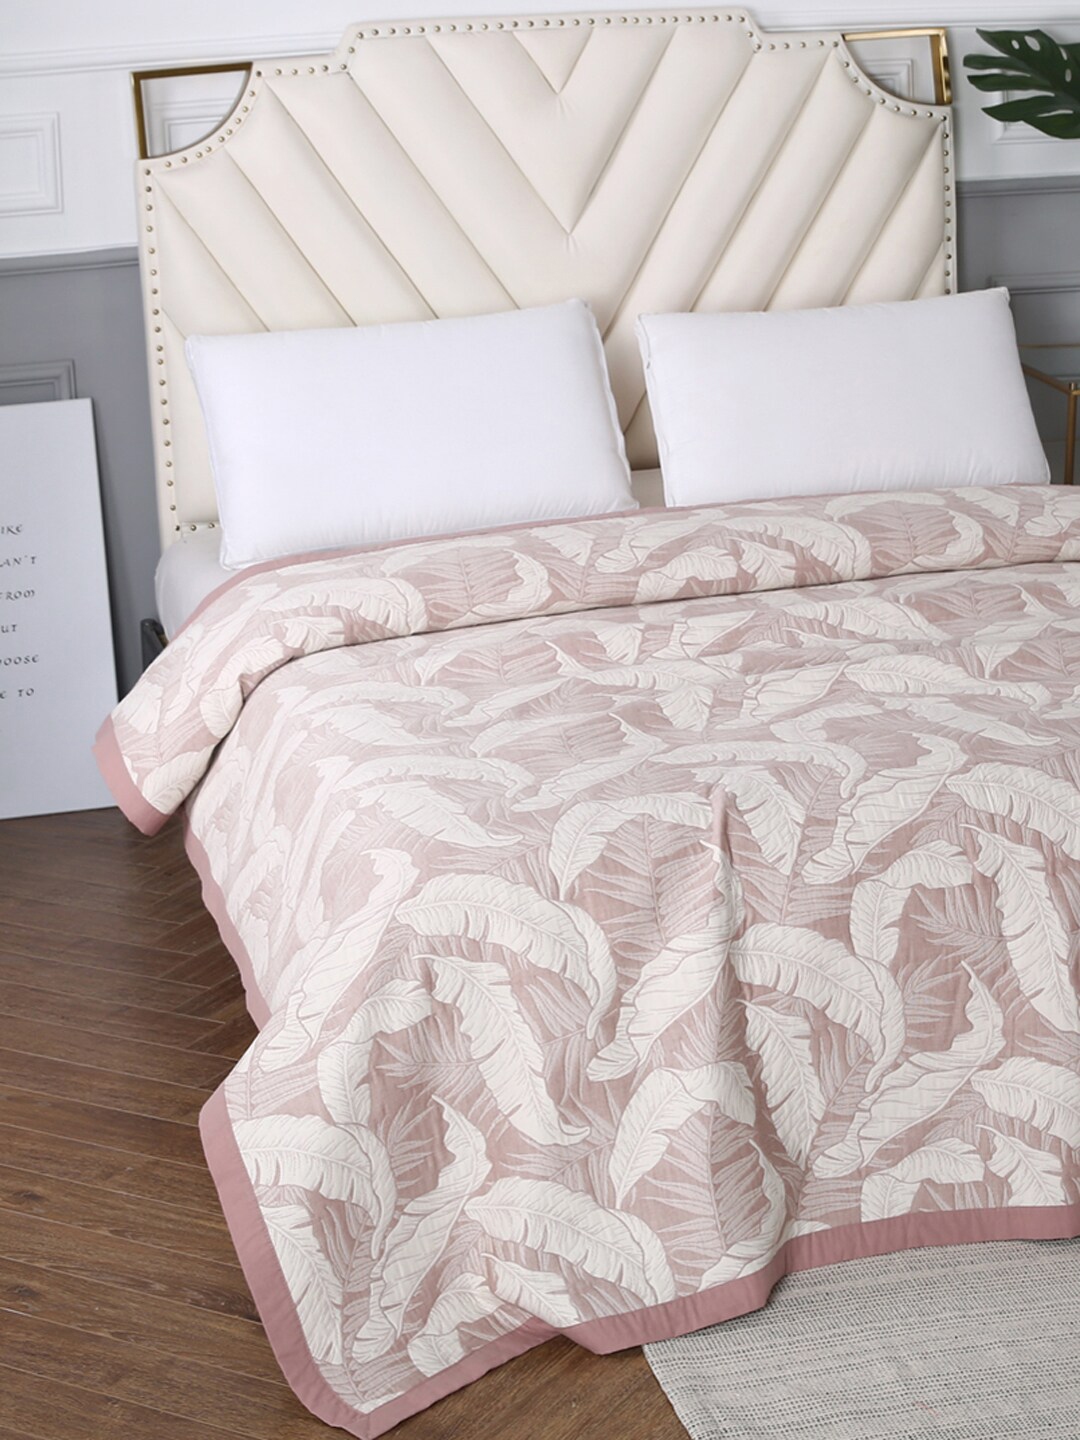 URBAN DREAM Red & White Floral Double Queen Bed Cover